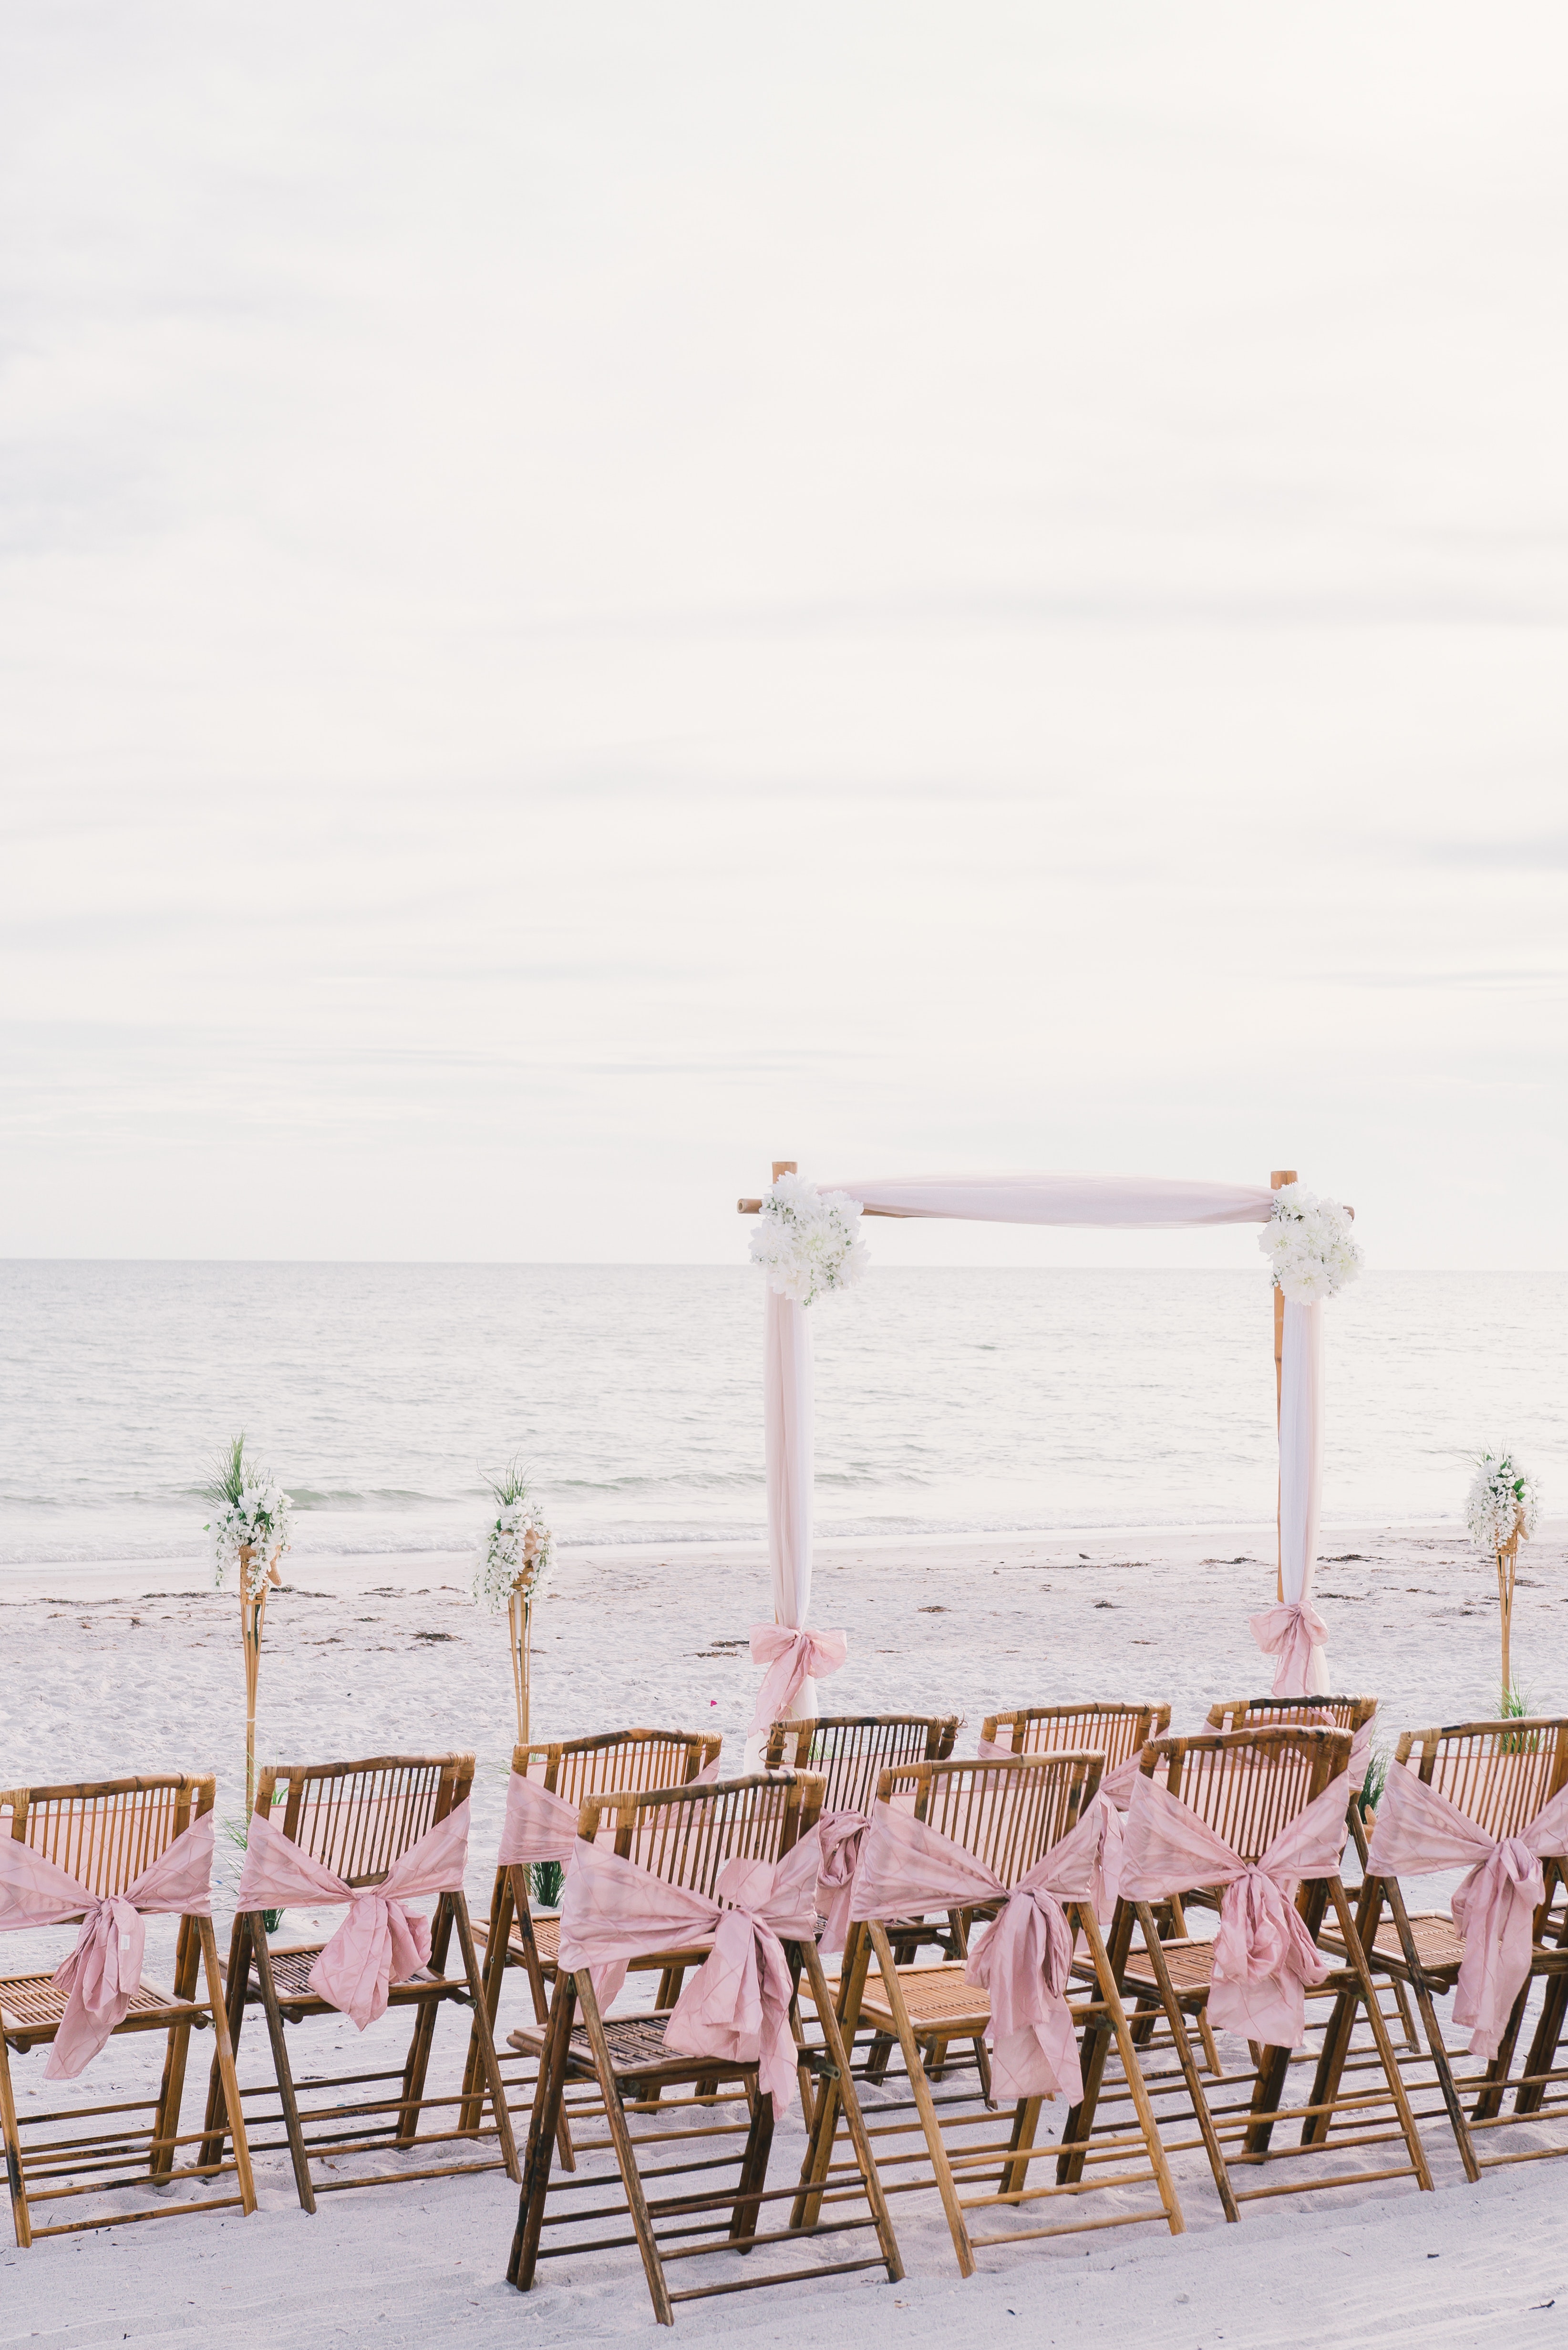 Beautiful weatherproof wedding setup! When is the best time to plan a wedding in Mexico and the Caribbean?